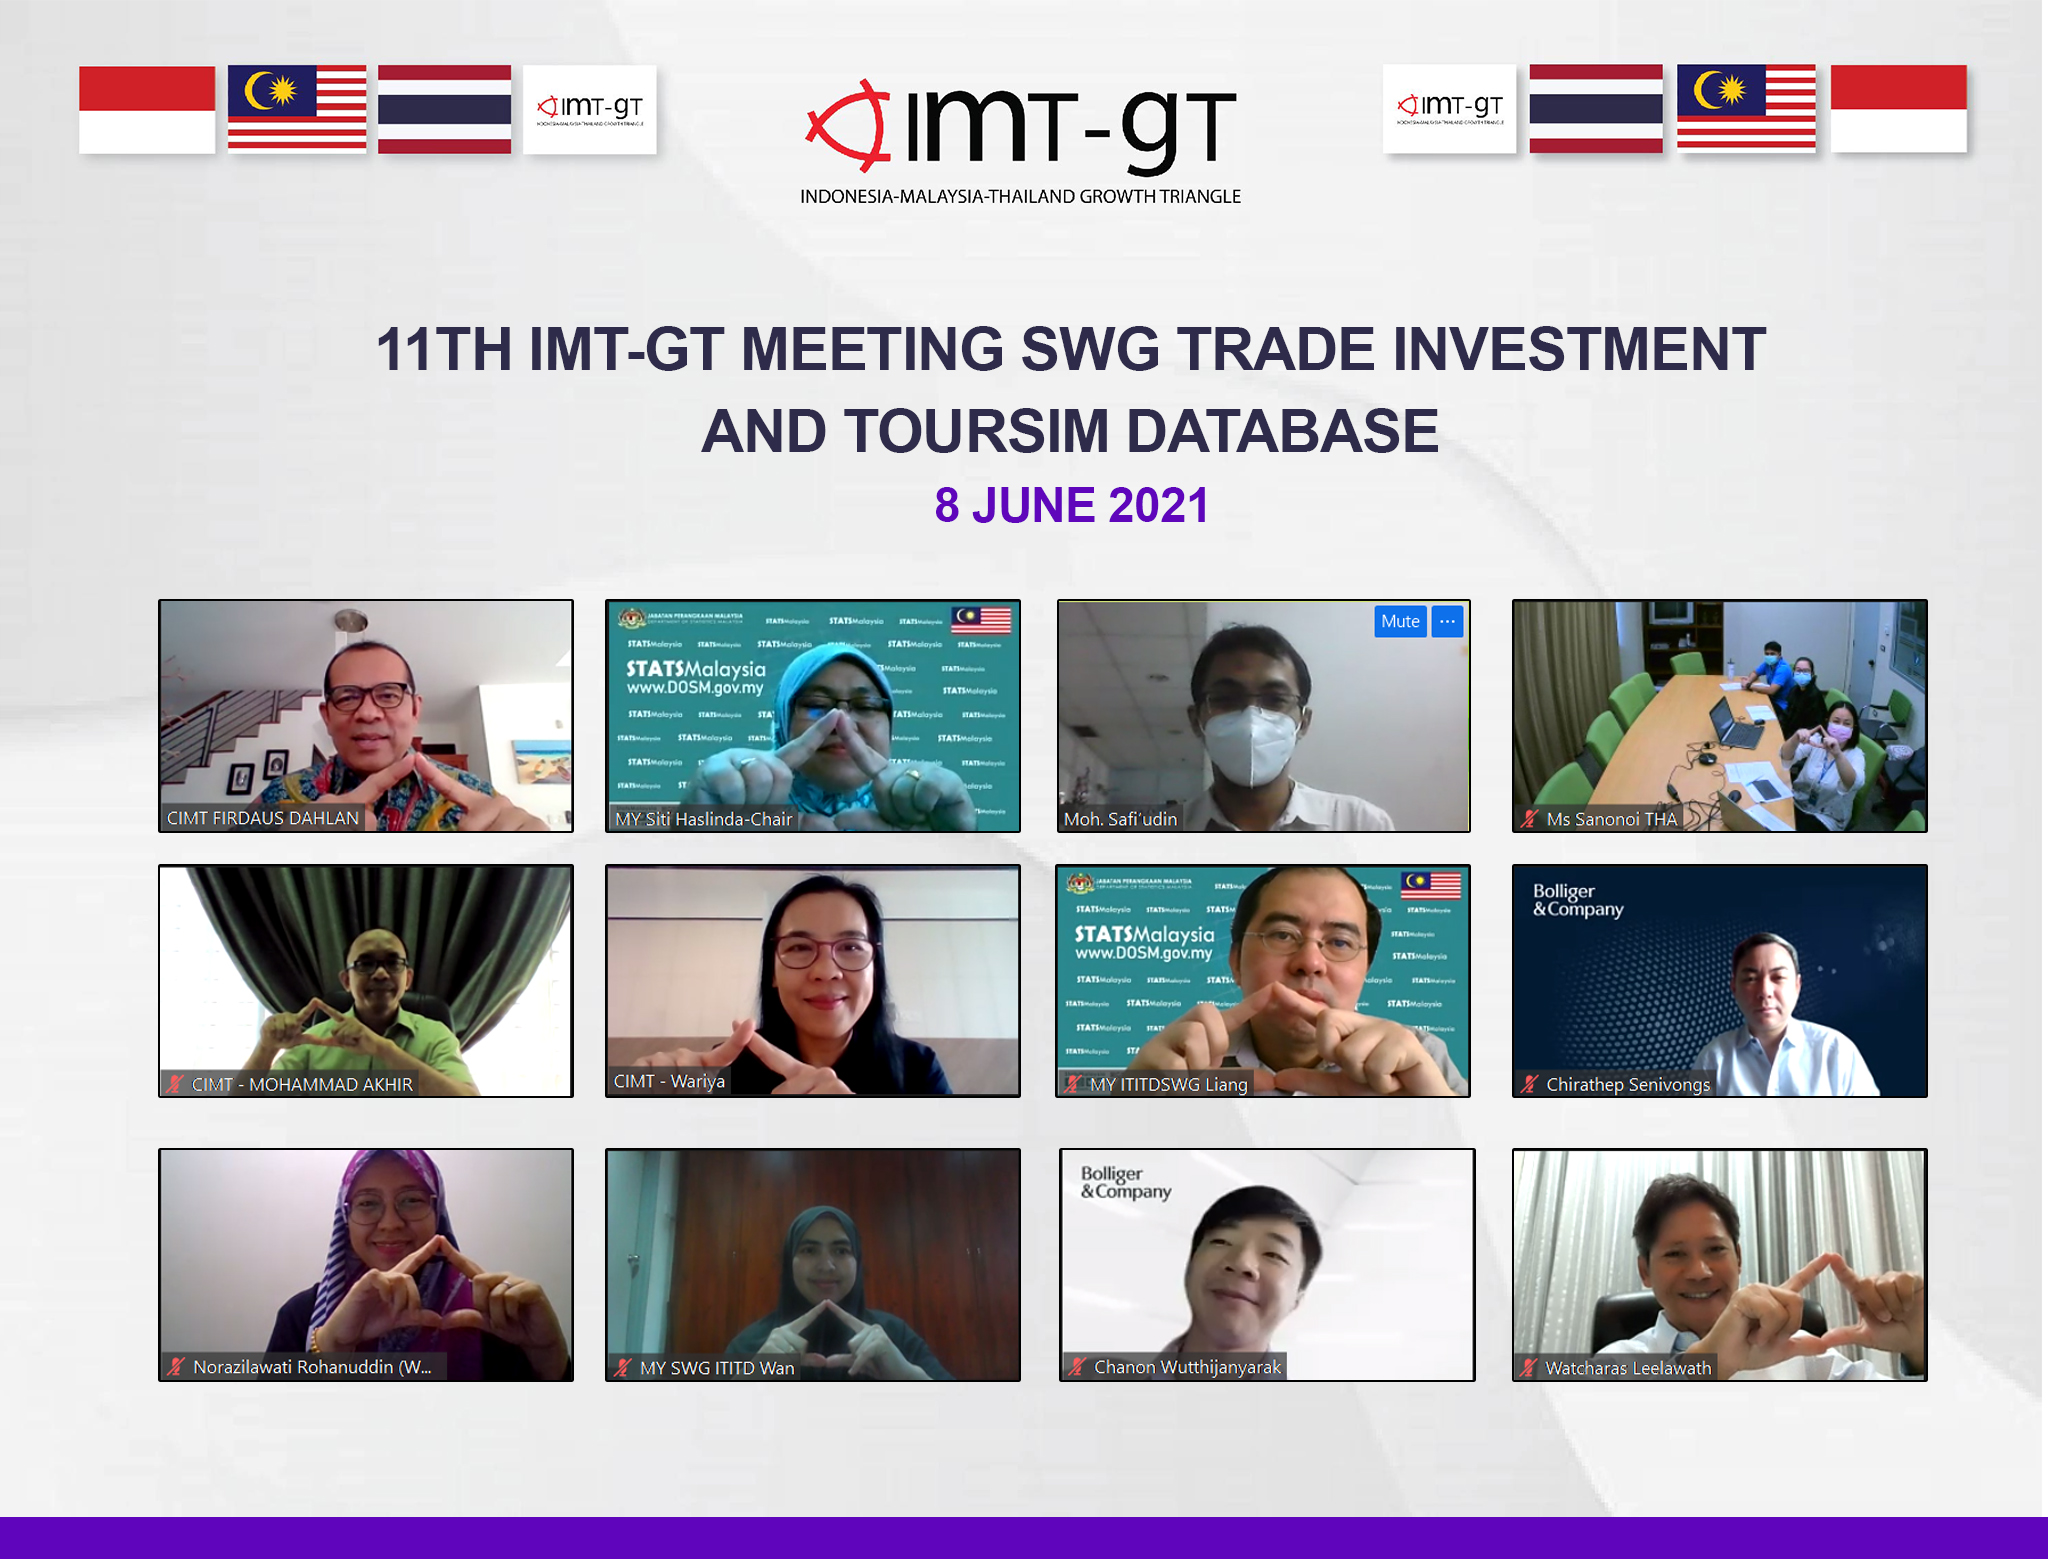 11th IMT-GT Meeting SWG Trade Investment And Tourism Database